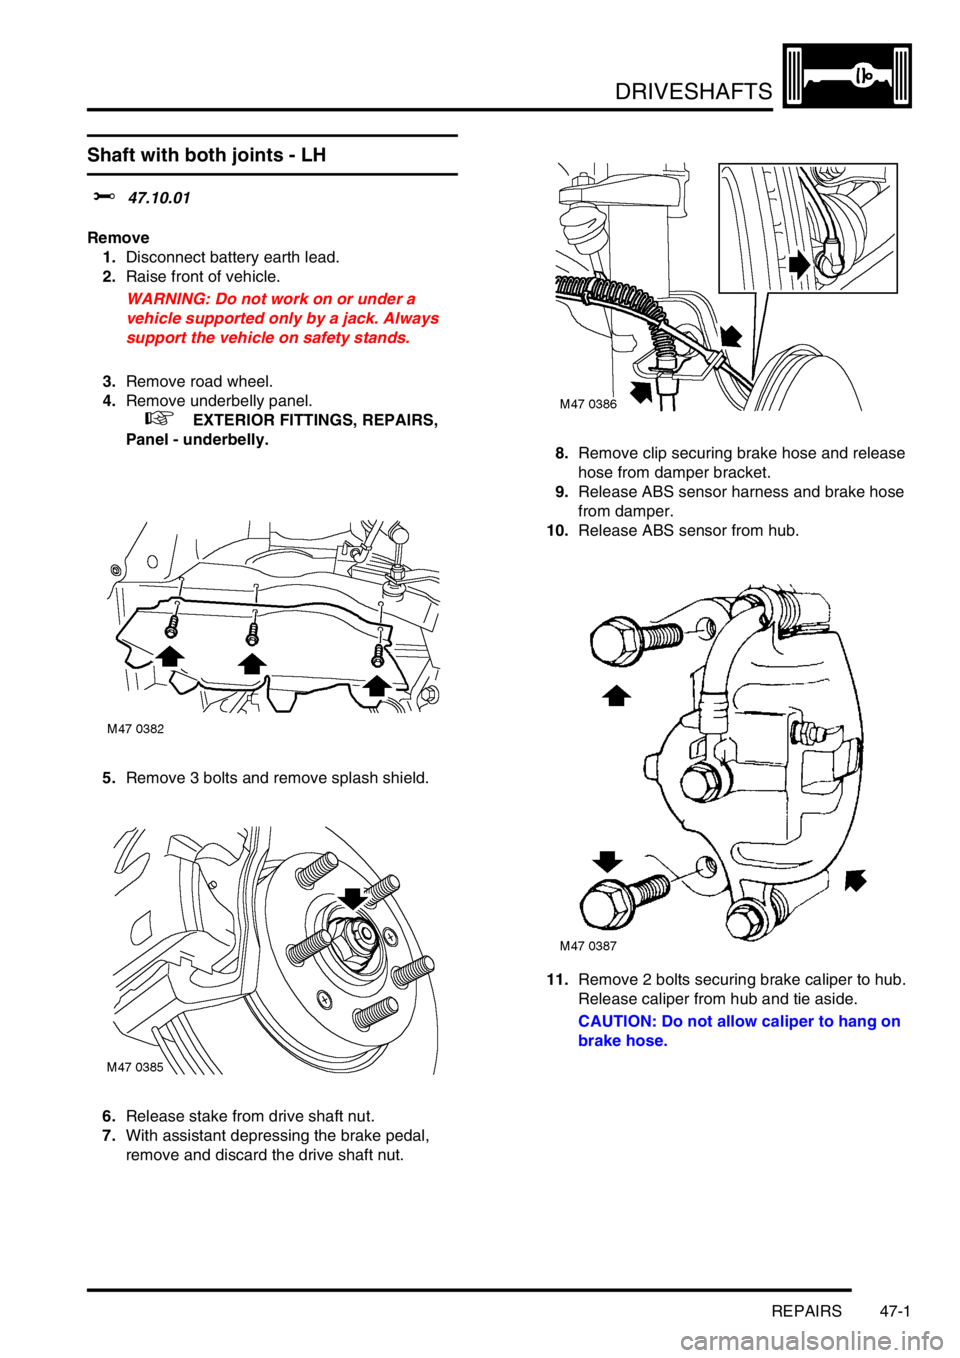 LAND ROVER FREELANDER 2001 User Guide DRIVESHAFTS
REPAIRS 47-1
DRIV ESHAFTS REPAIRS
Shaft with both joints - LH
$% 47.10.01
Remove
1.Disconnect battery earth lead.
2.Raise front of vehicle.
WARNING: Do not work on or under a 
vehicle supp